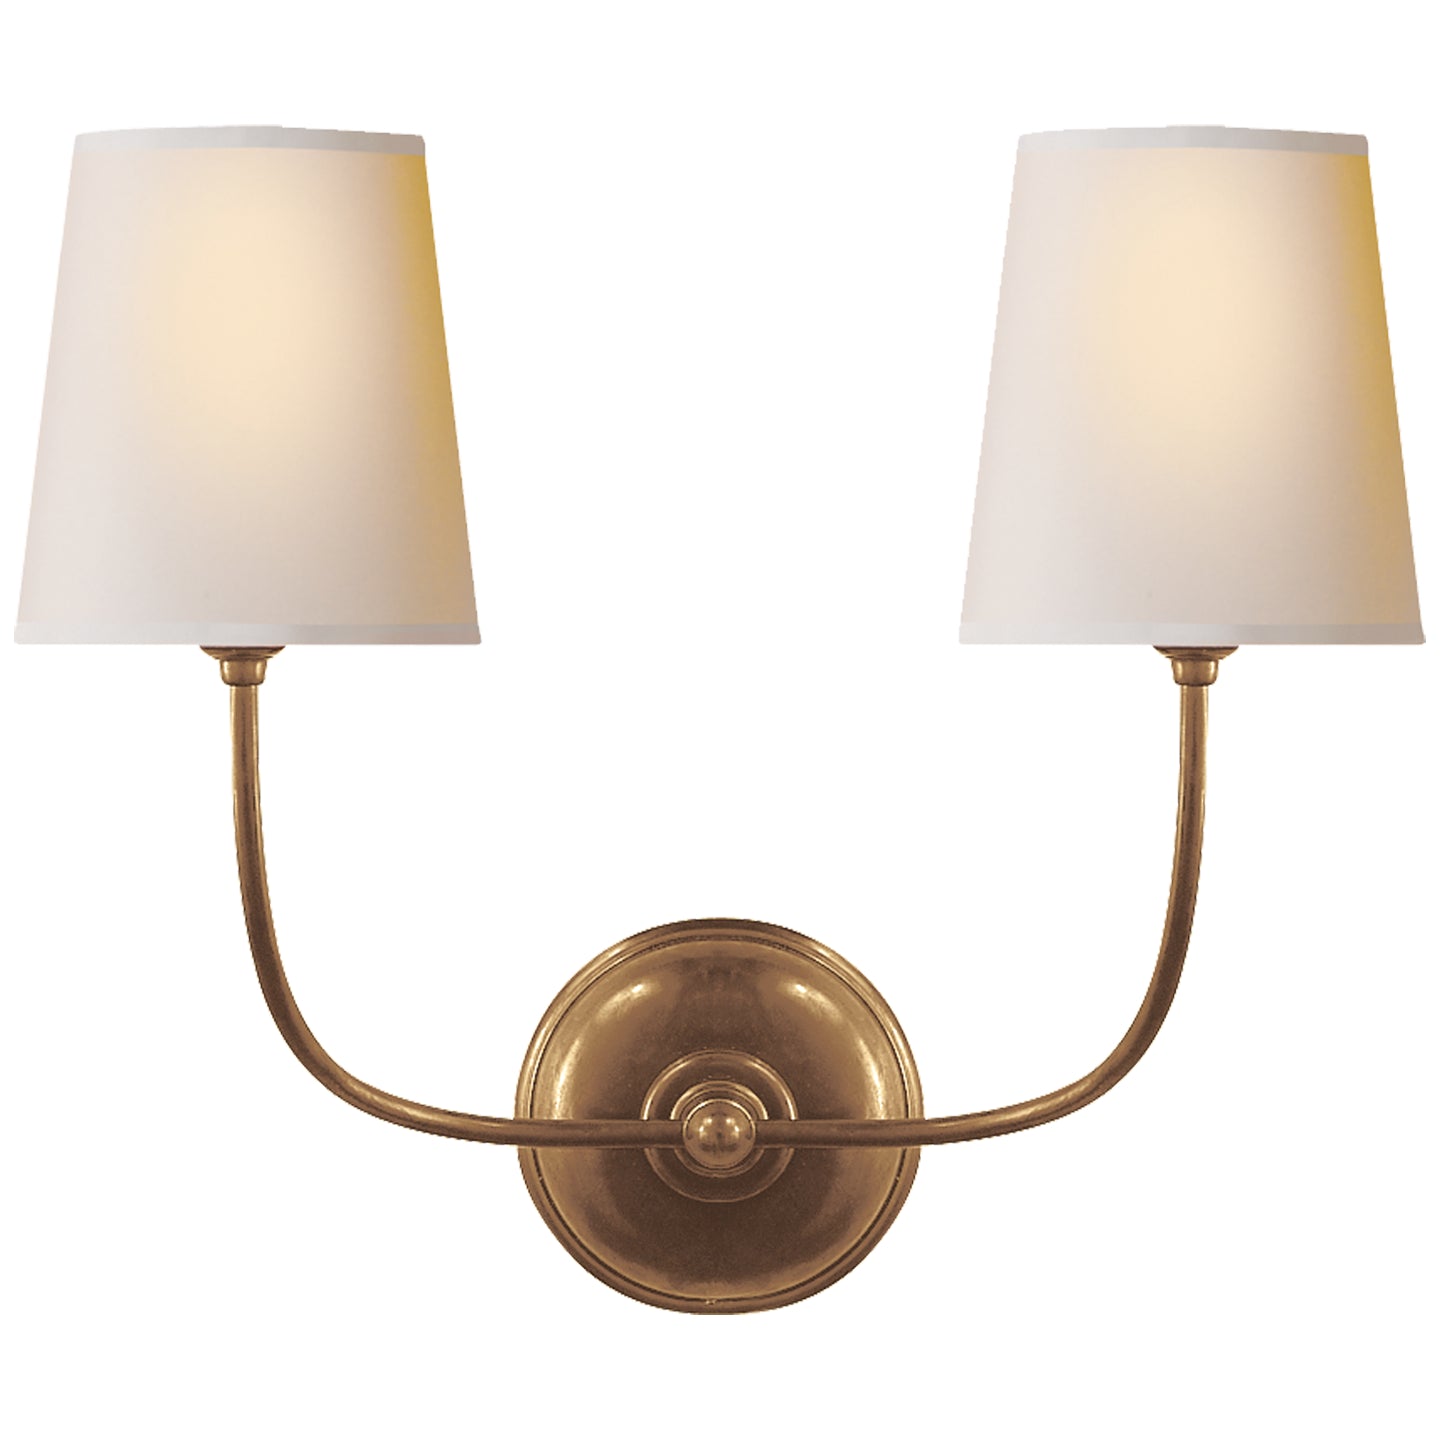 Two Light Wall Sconce from the Vendome collection in Hand-Rubbed Antique Brass finish